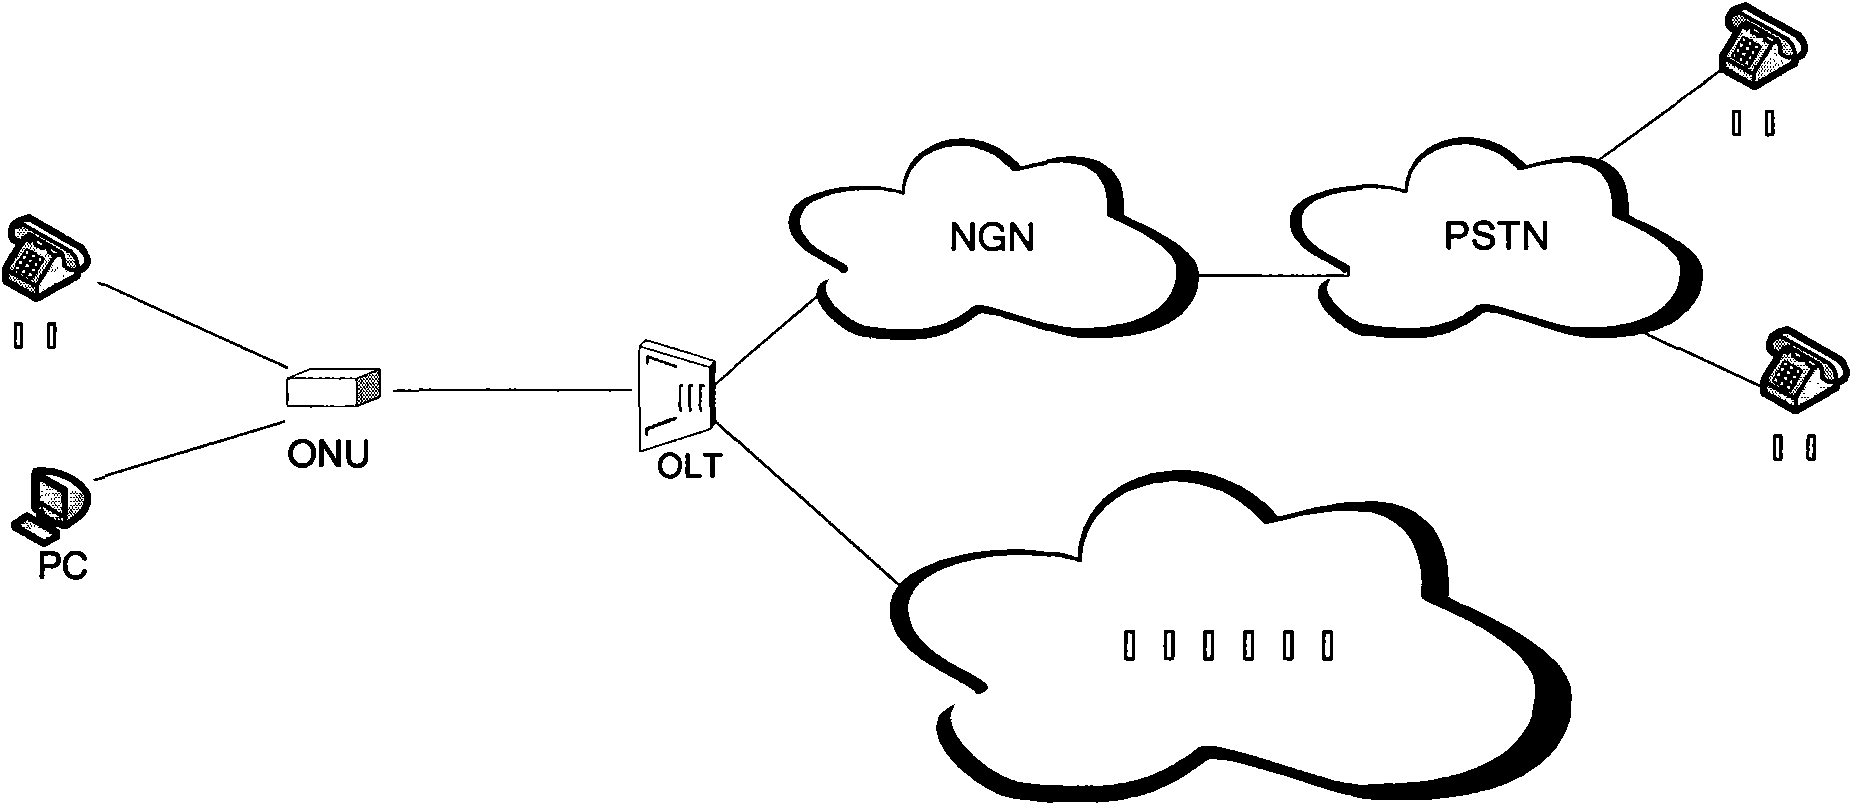 Plugboard type FTTB (Fiber To The Building) type ONU (Optical Network Unit) and method for realizing voice service